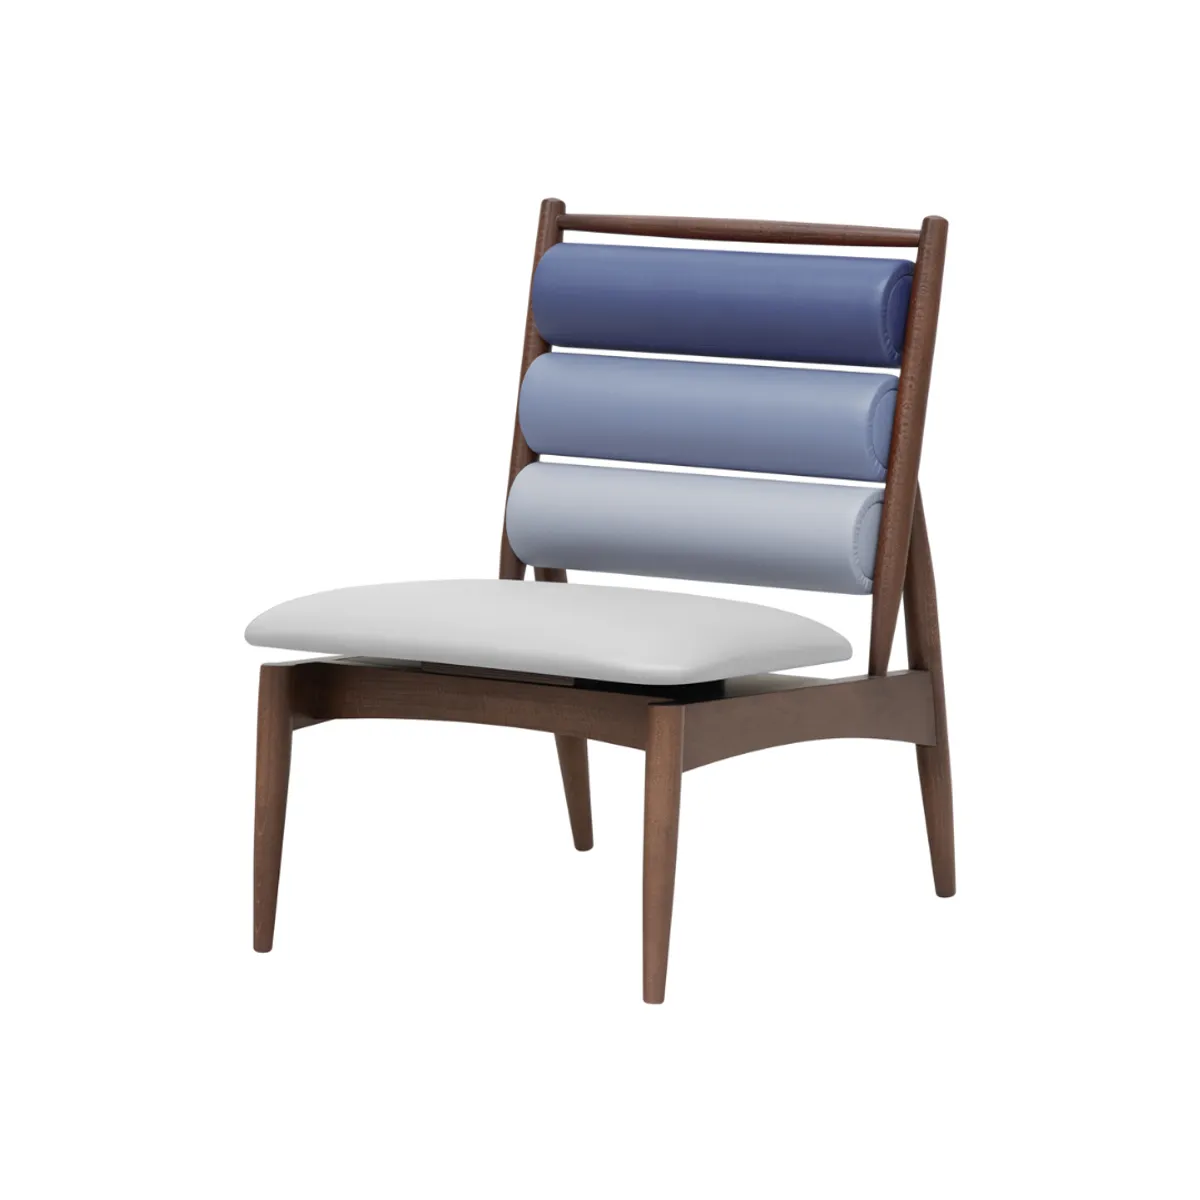 Rolla lounge chair 1